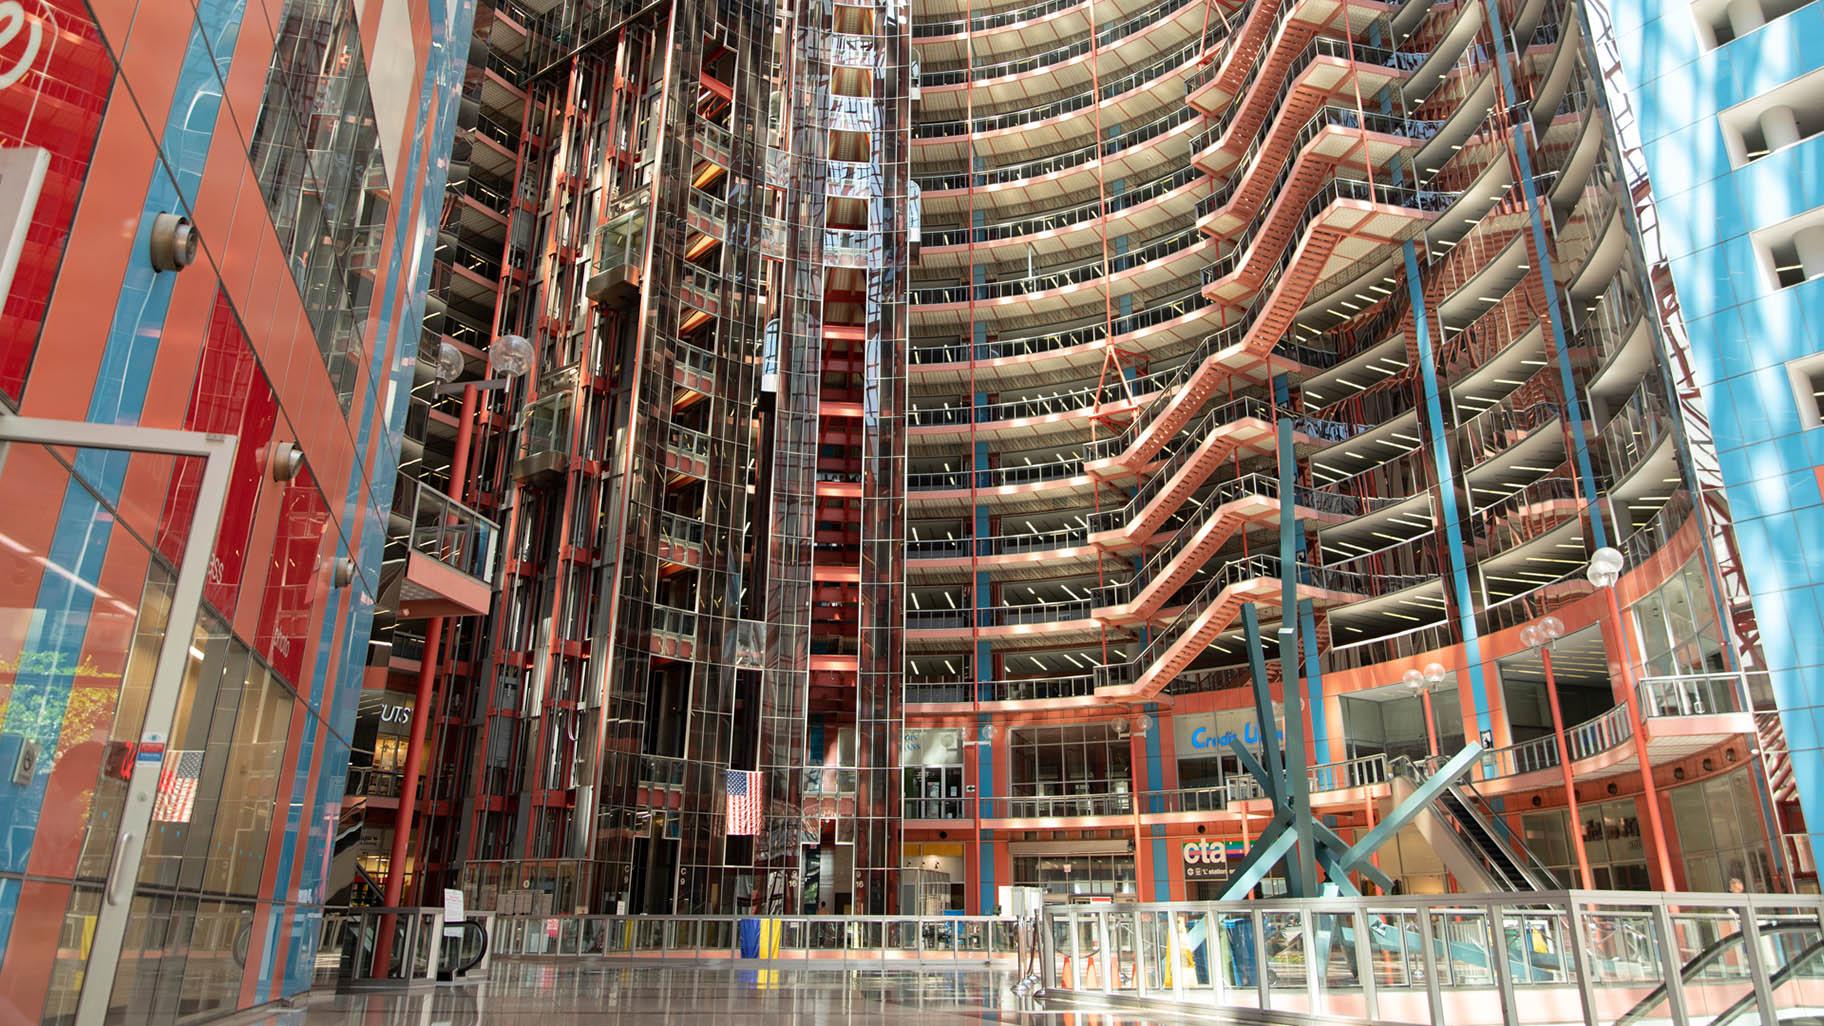 The interior of the James R. Thompson Center is pictured on July 12, 2022. (Michael Izquierdo / WTTW News)